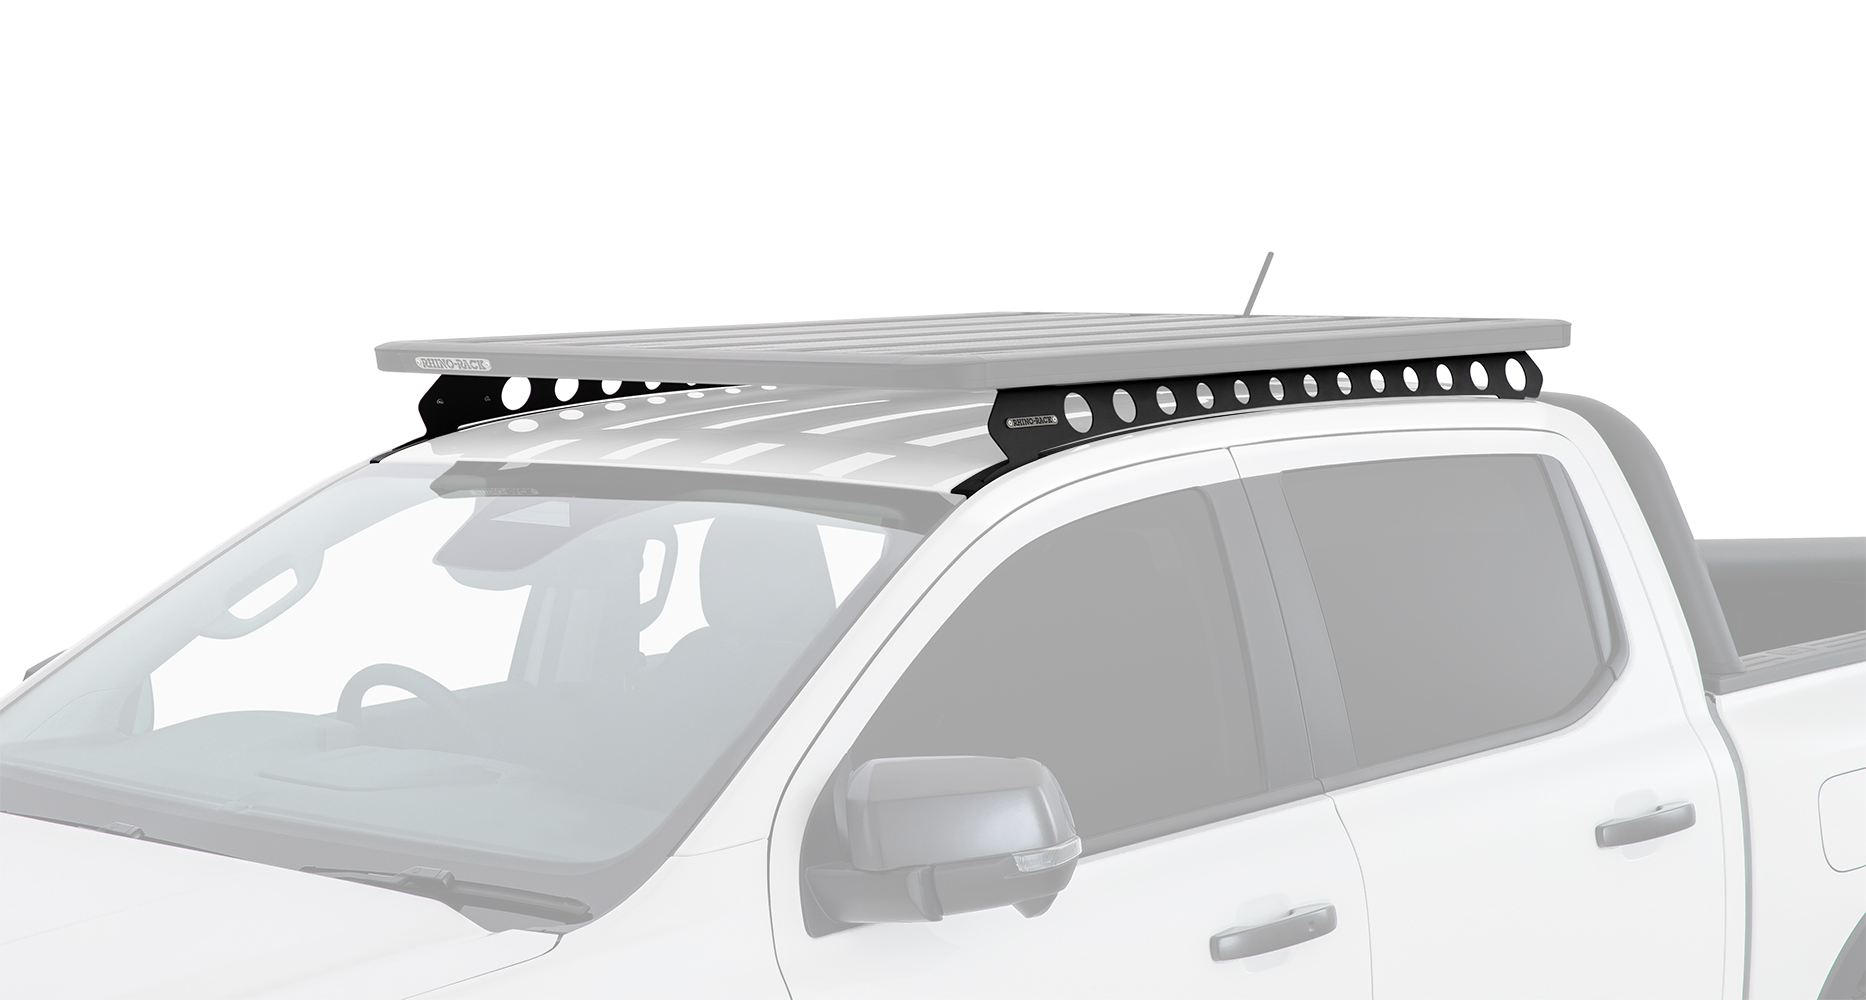 Rhino-Rack Backbone Mounting System for double cab Ford Ranger P703 and Volkswagen Amarok Gen2